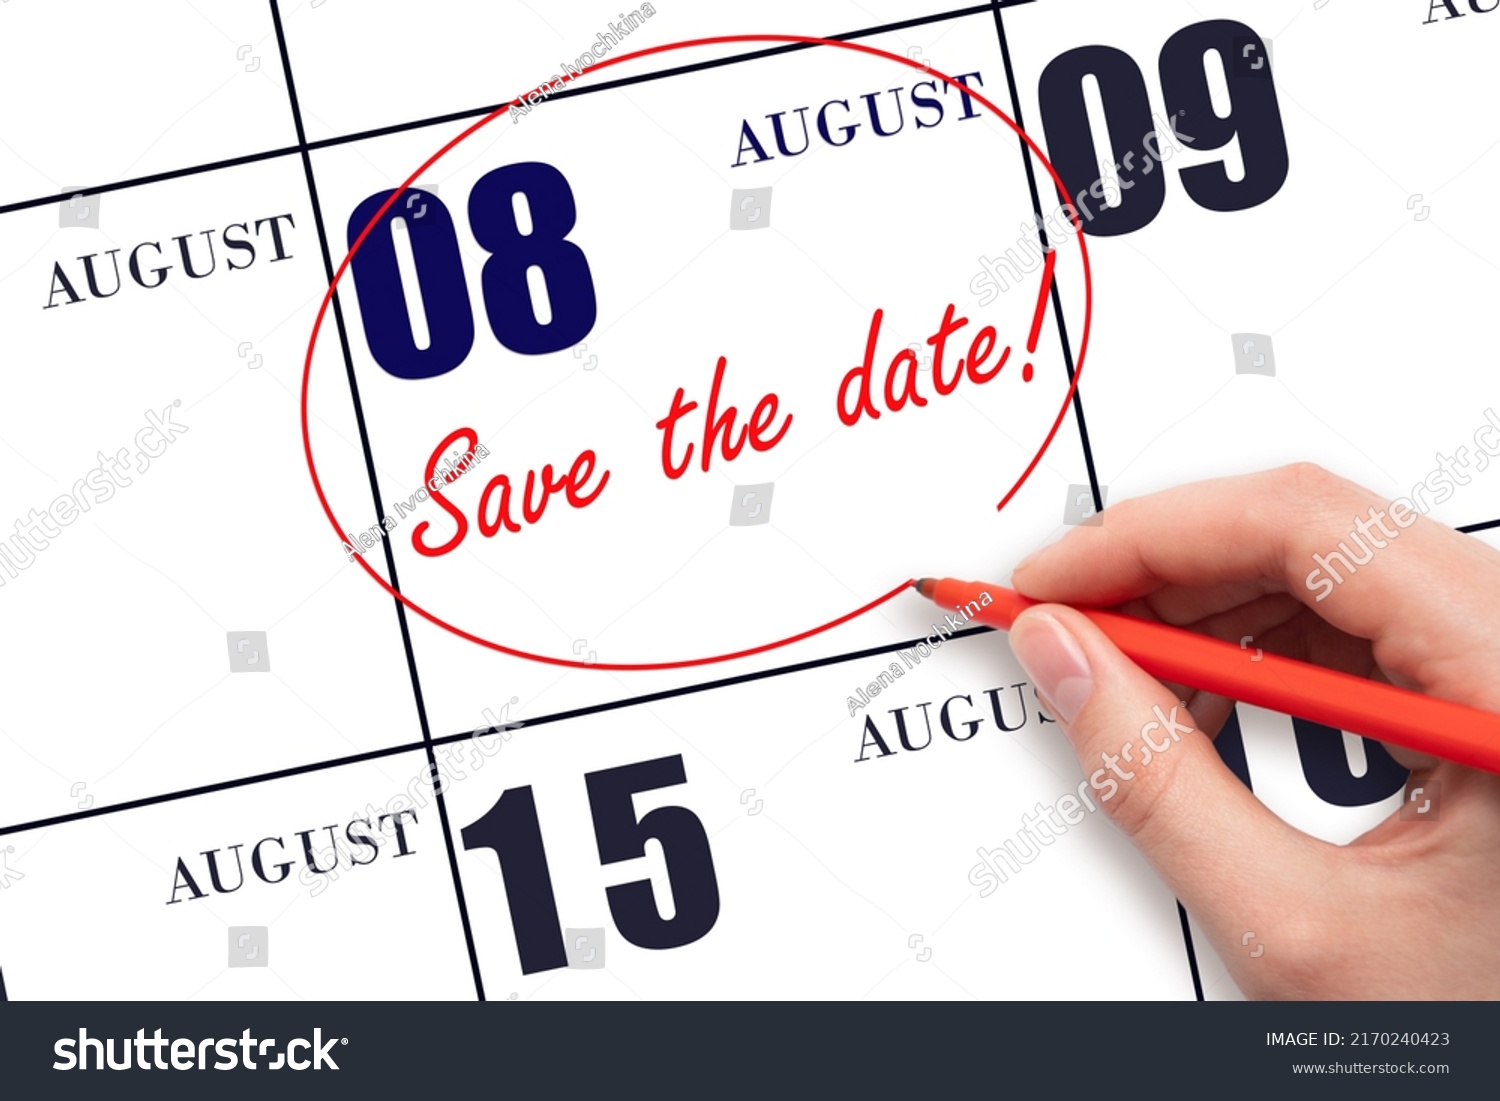 8th day of August. Hand drawing red line and writing the text Save the date on calendar date August 8.  Summer month, day of the year concept. #2170240423